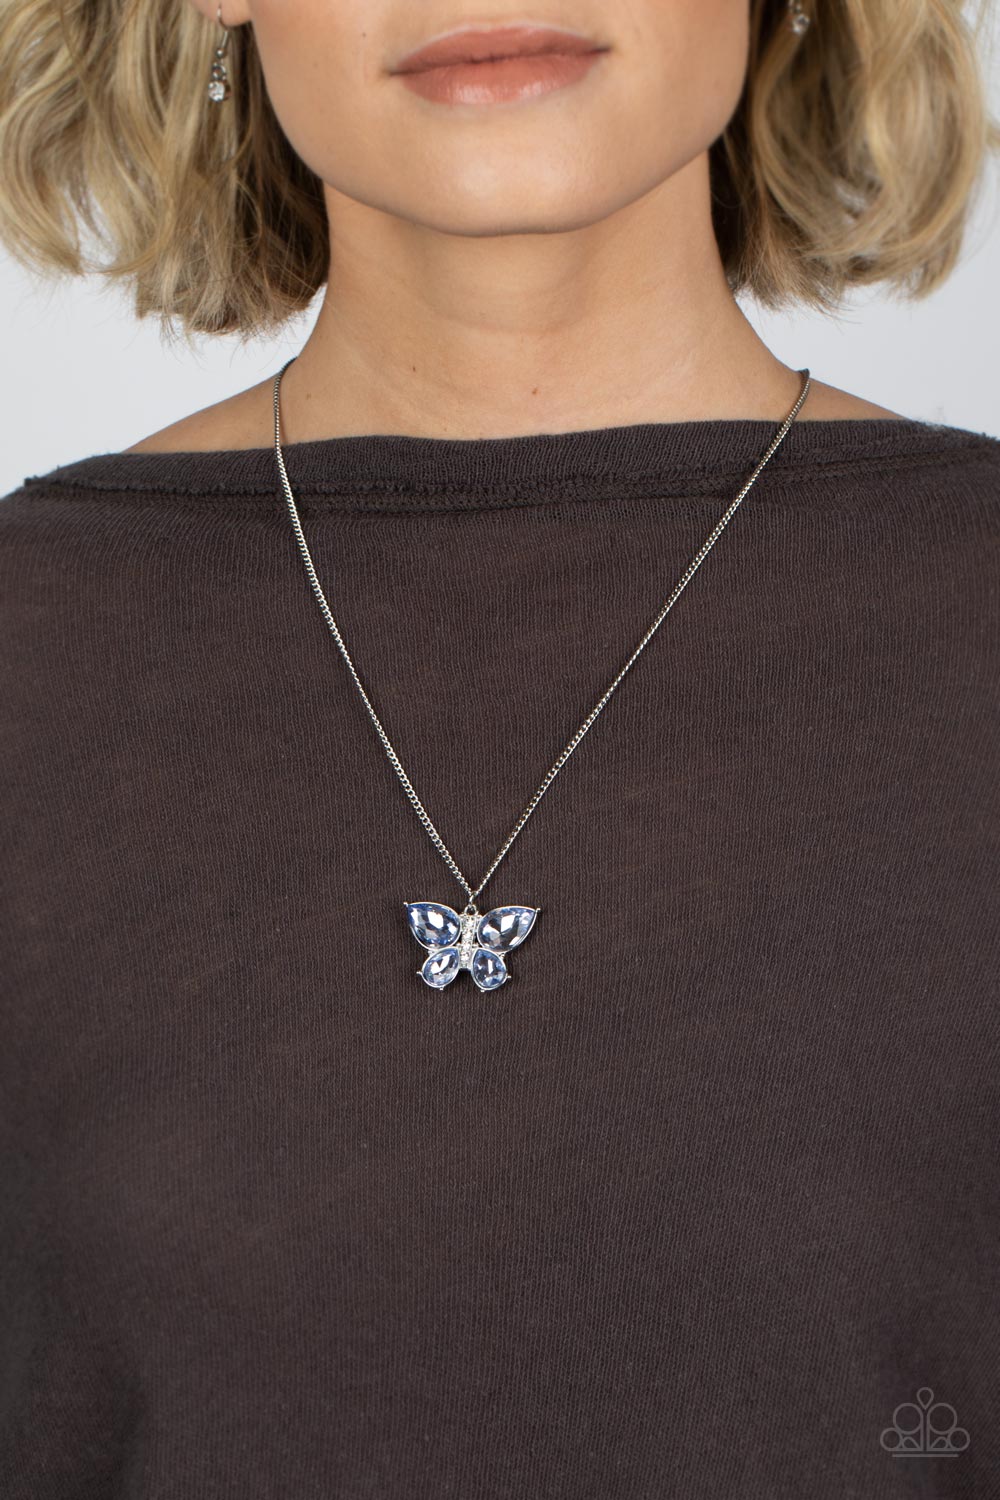 Free-Flying Flutter - Blue Butterfly Necklace